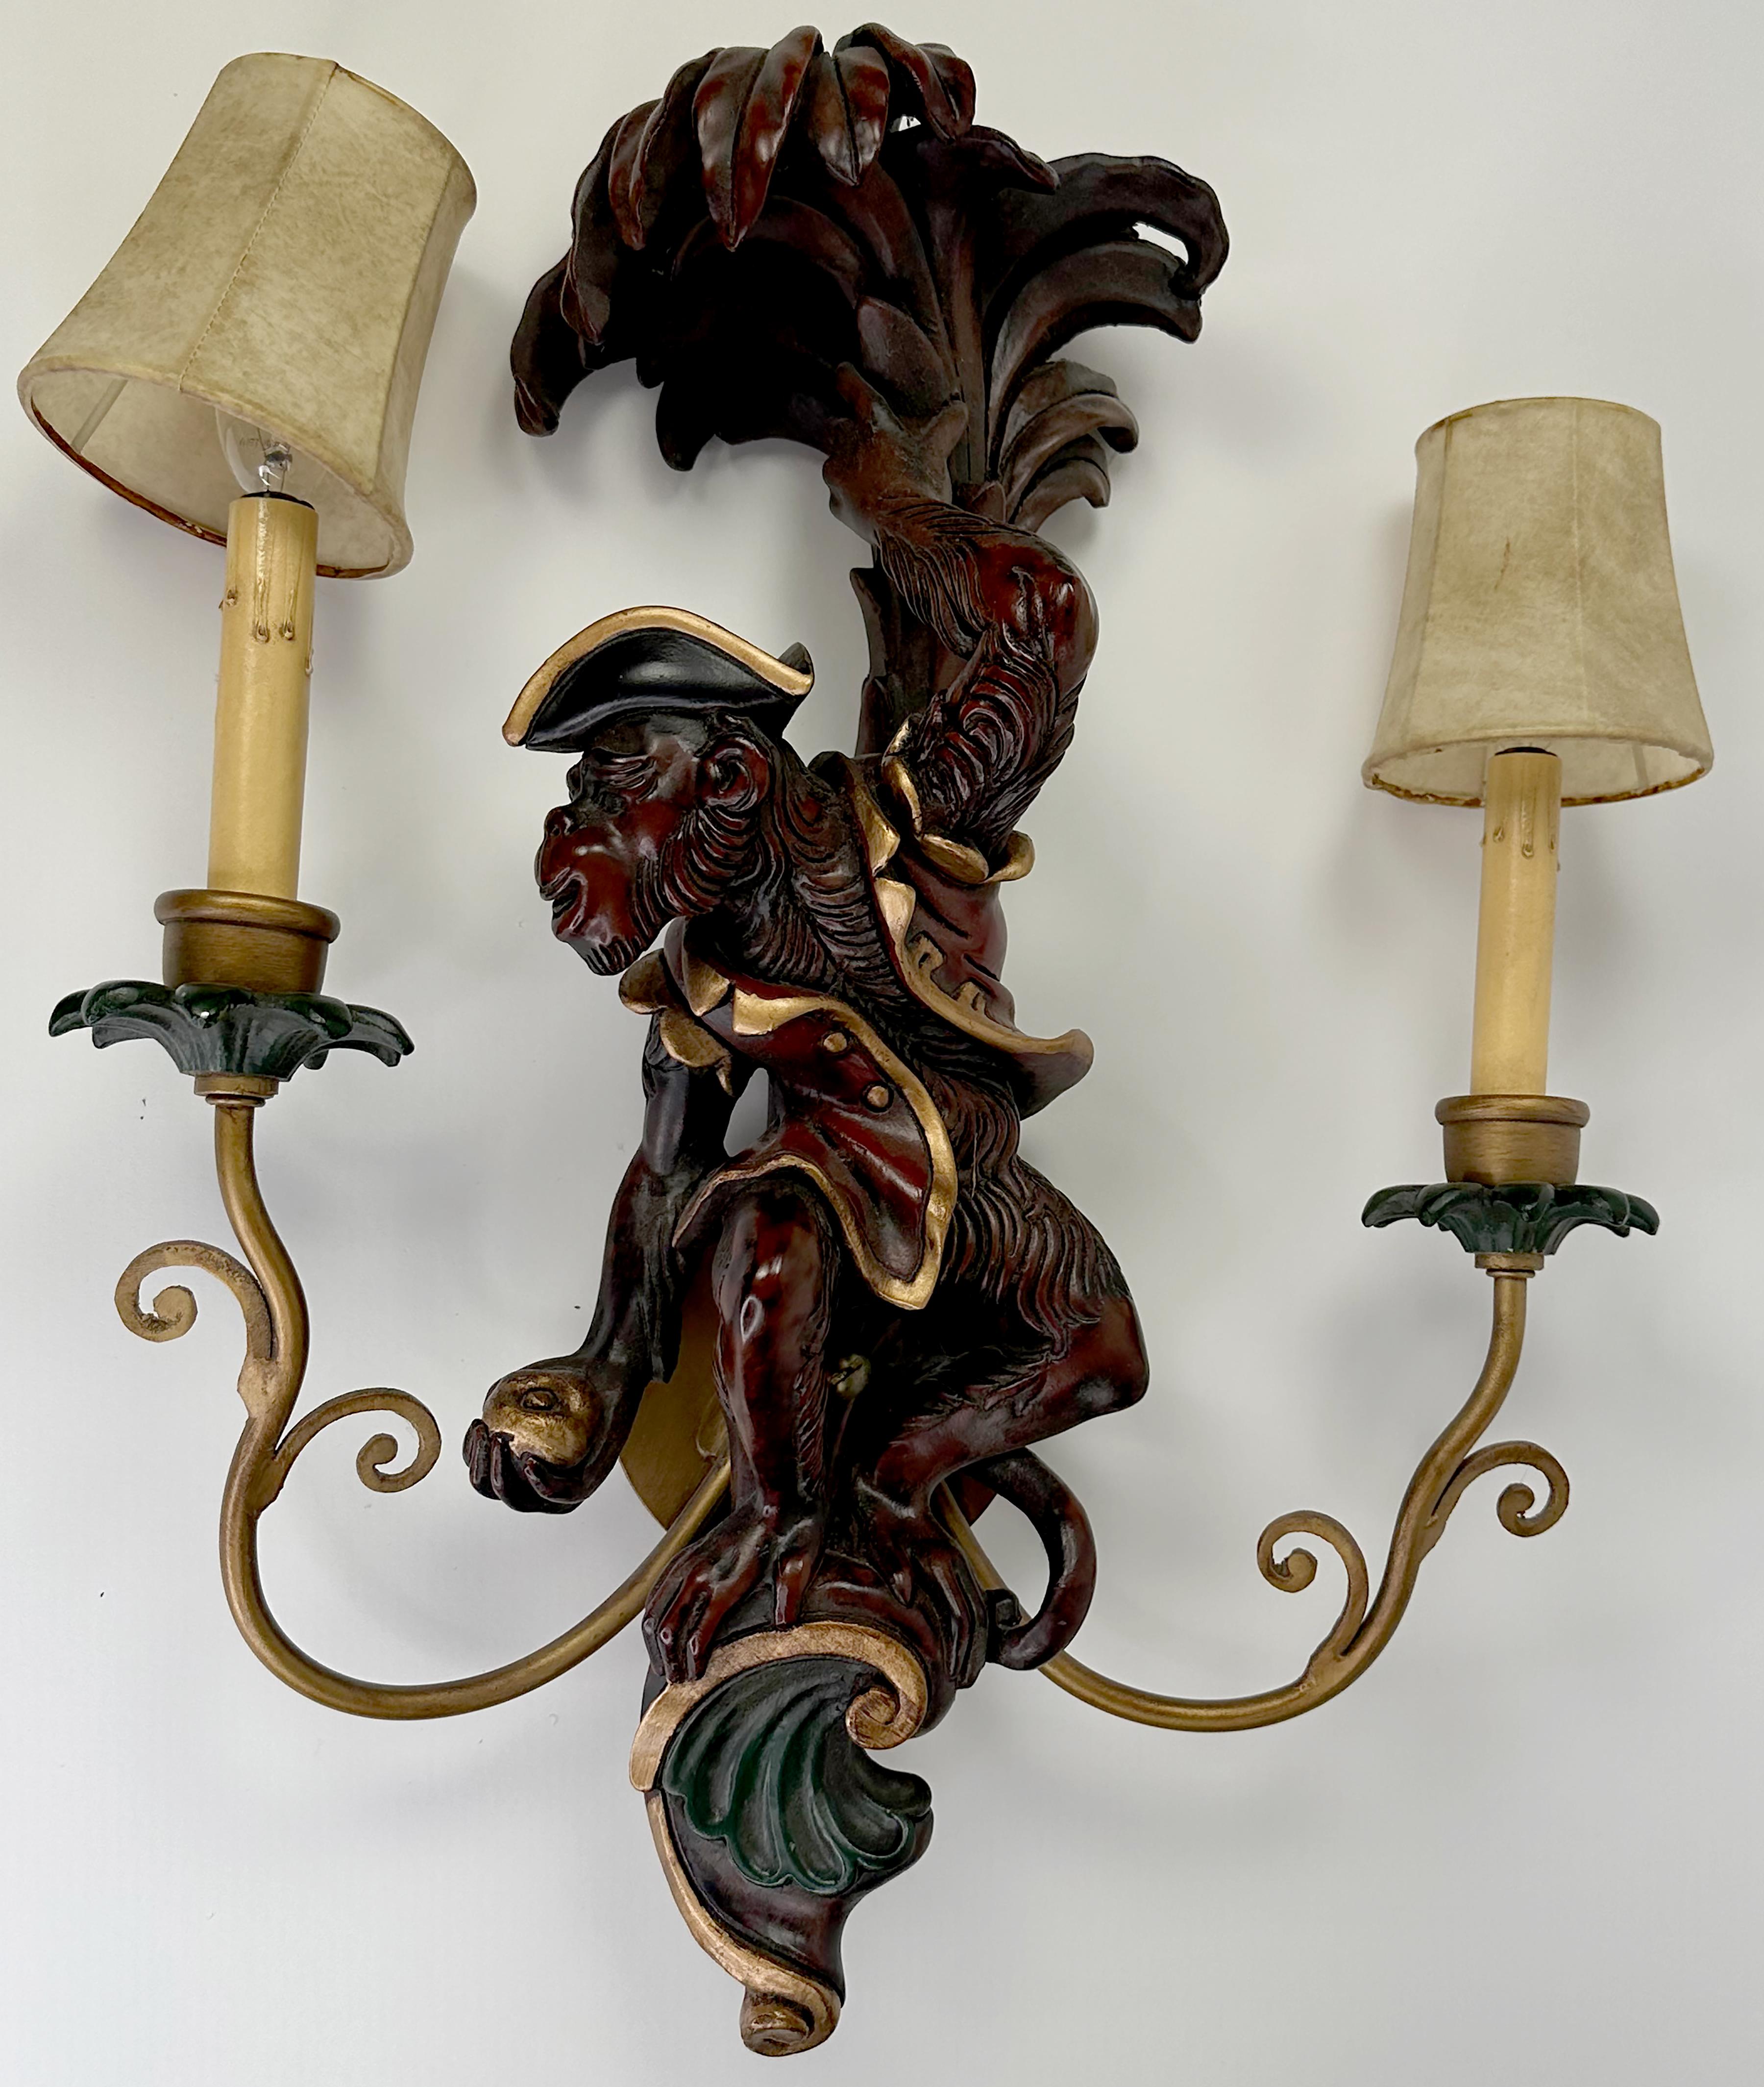 A handsome set of hand-made wall light 2 arm carved wood monkey sconce wall lamps. Hand painted finish with browns, reds and gilt trim. Decorative trim adorns the top above the figures and just below them. The lights stand on curved gilt metal rods